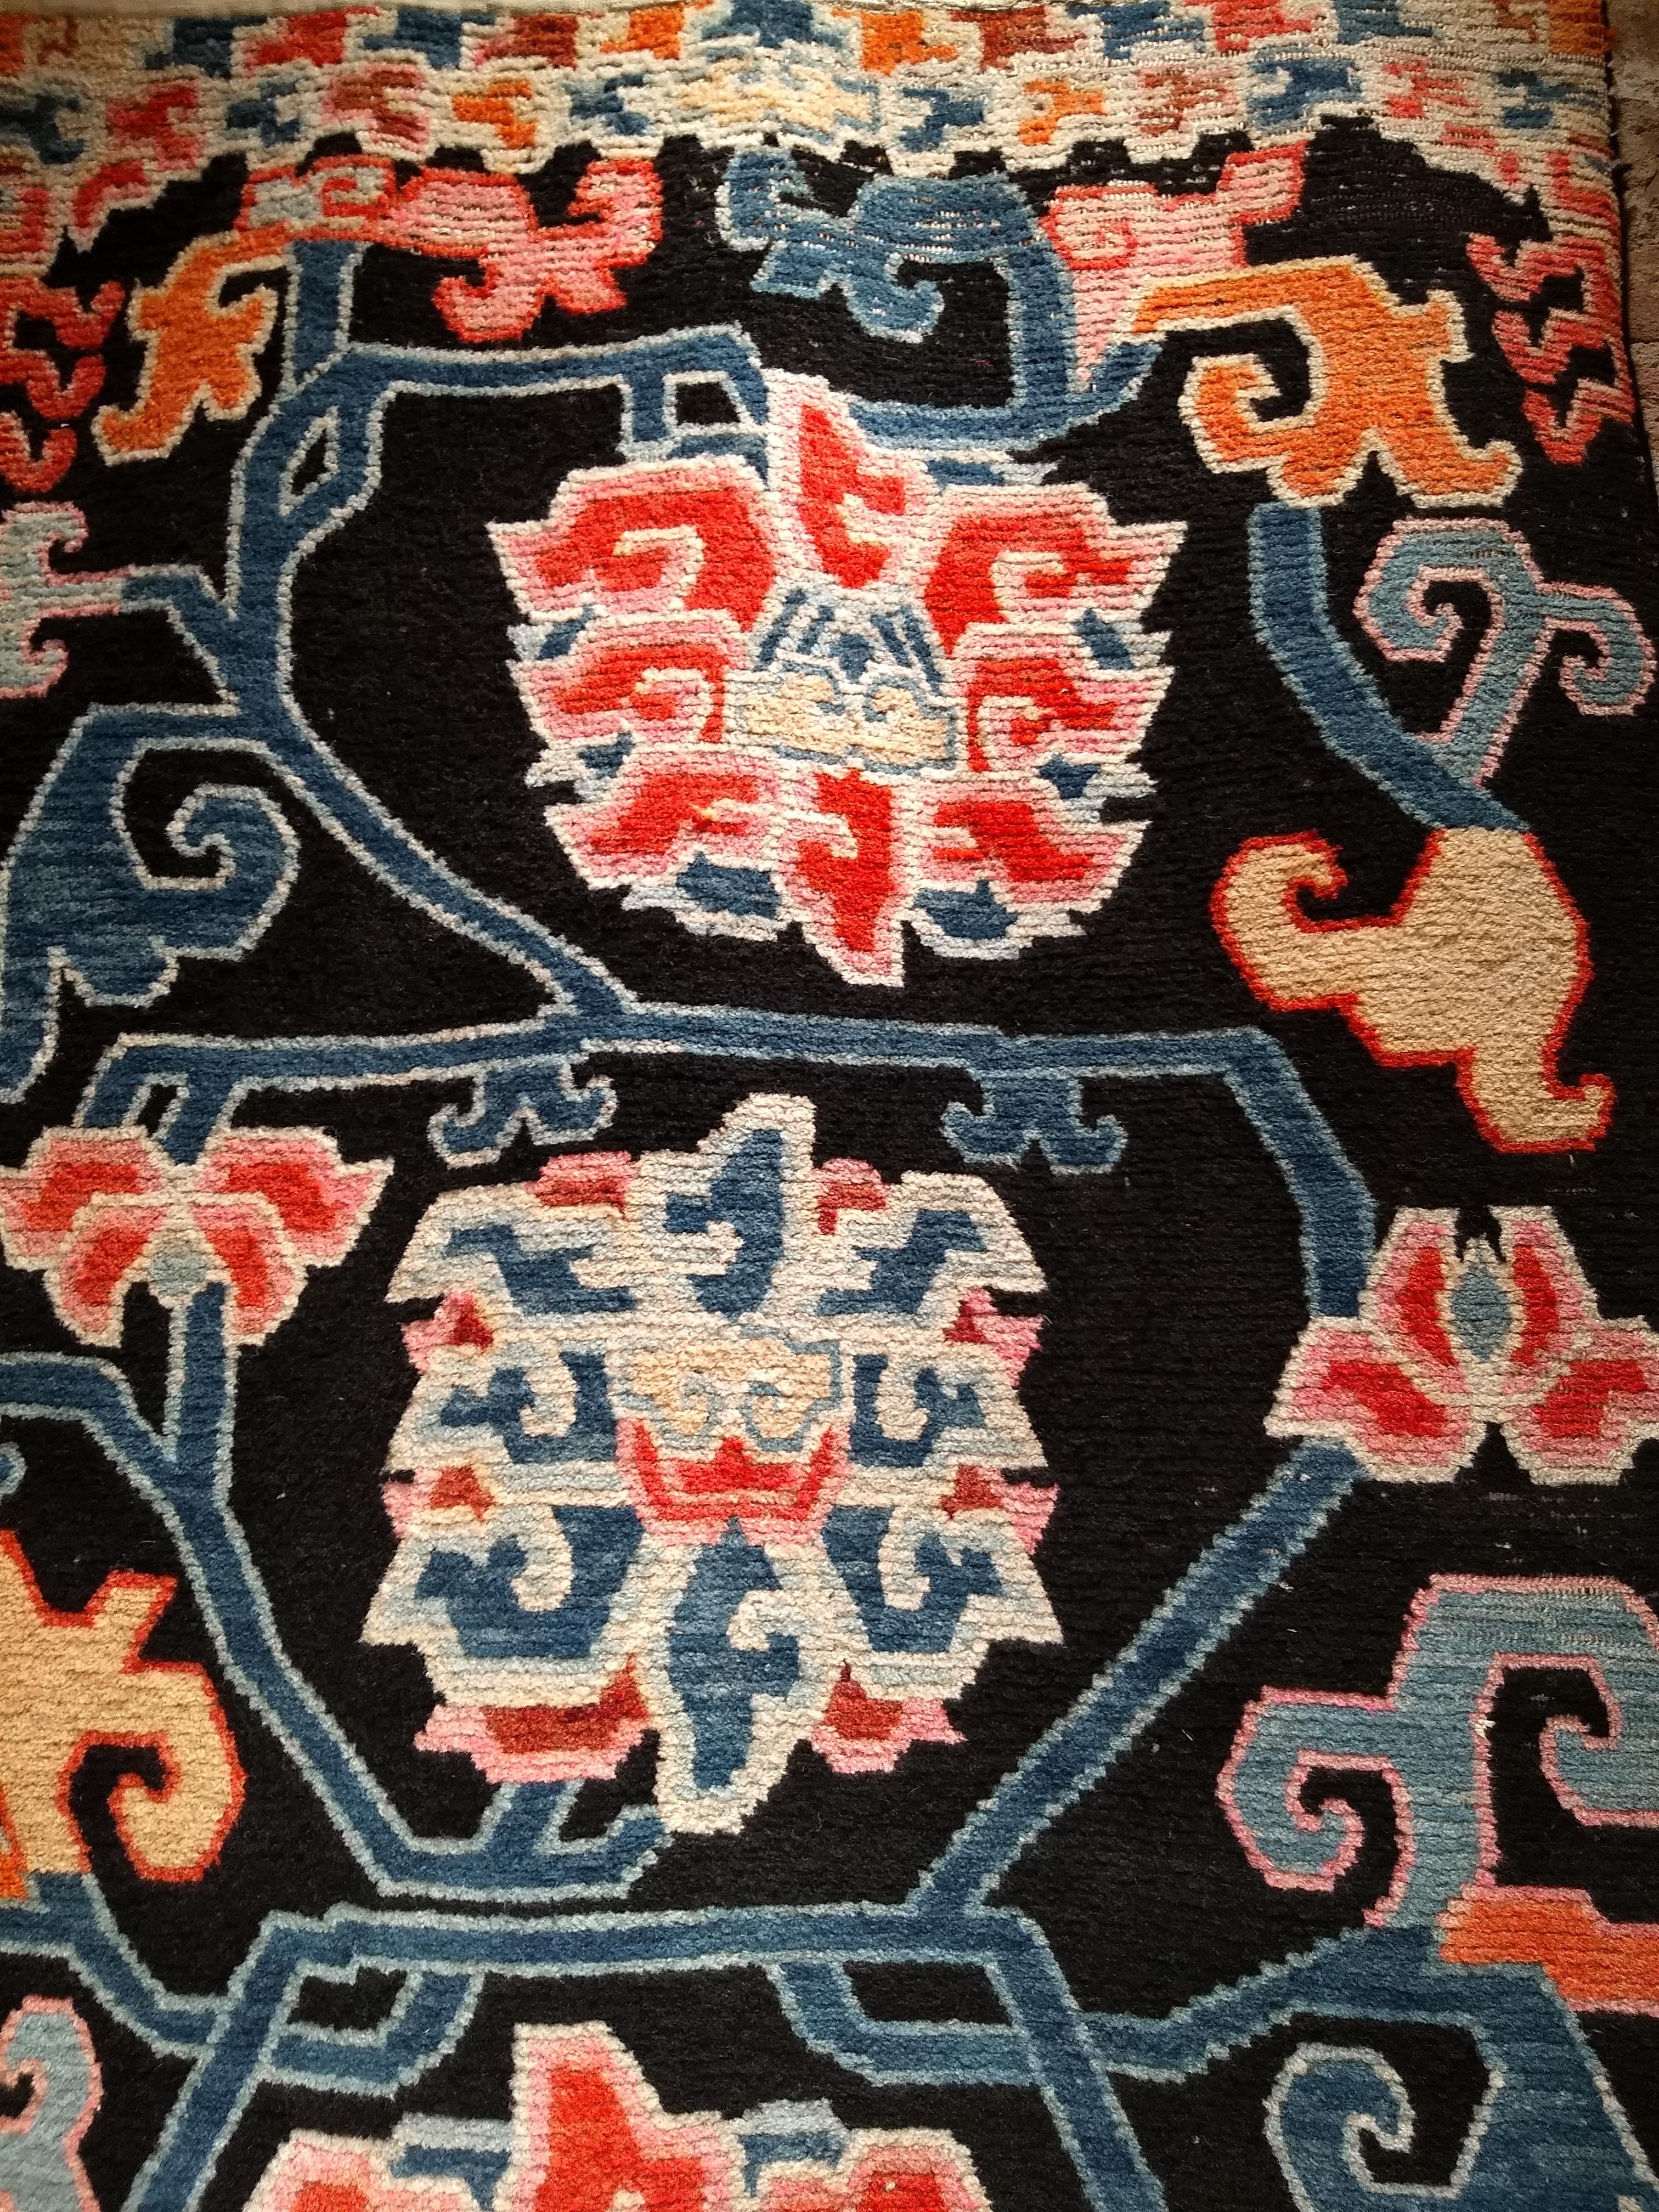 Vintage Tibetan Rug with Lotus Flowers and Cloud Symbols in French Blue and Red For Sale 2